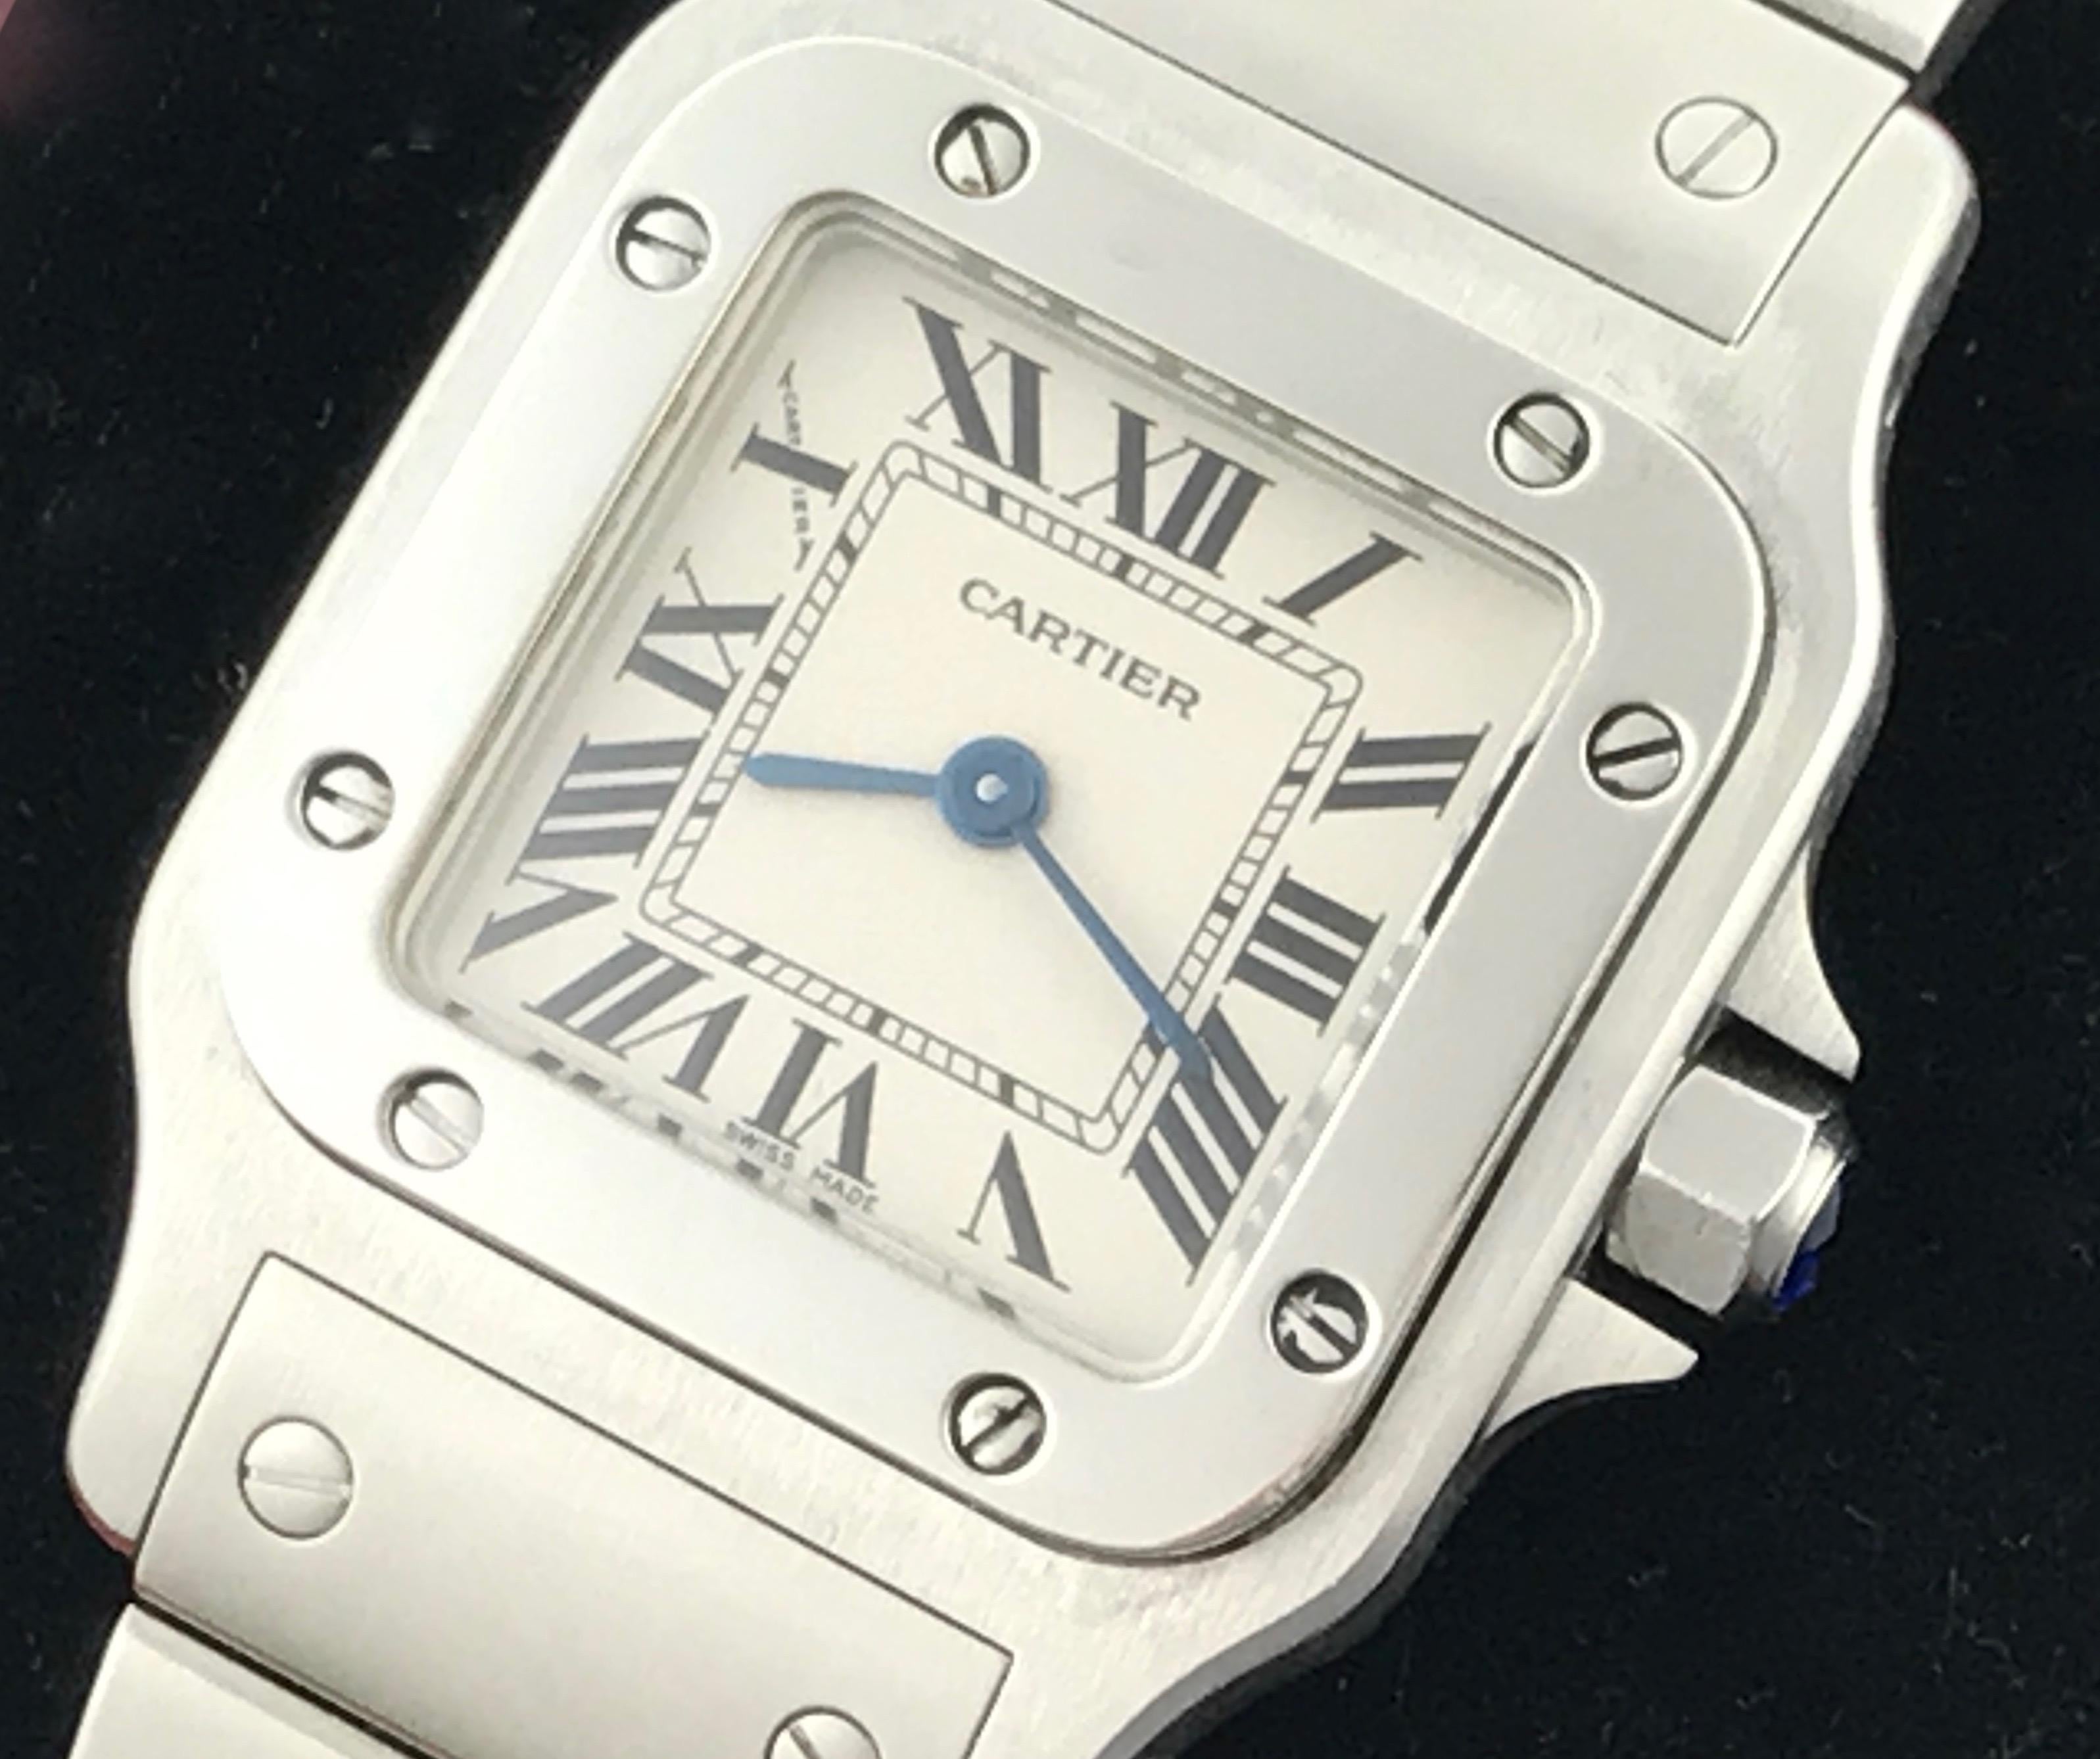 Cartier Ladies Santos Model W20056D6 Stainless Steel Wrist Watch.  Quartz movement.  Stainless Steel square style case with blue sapphire cabachon setting crown (24x34mm). Water Resistant to 30 Meters - 100 Feet. Stainless Steel bracelet with